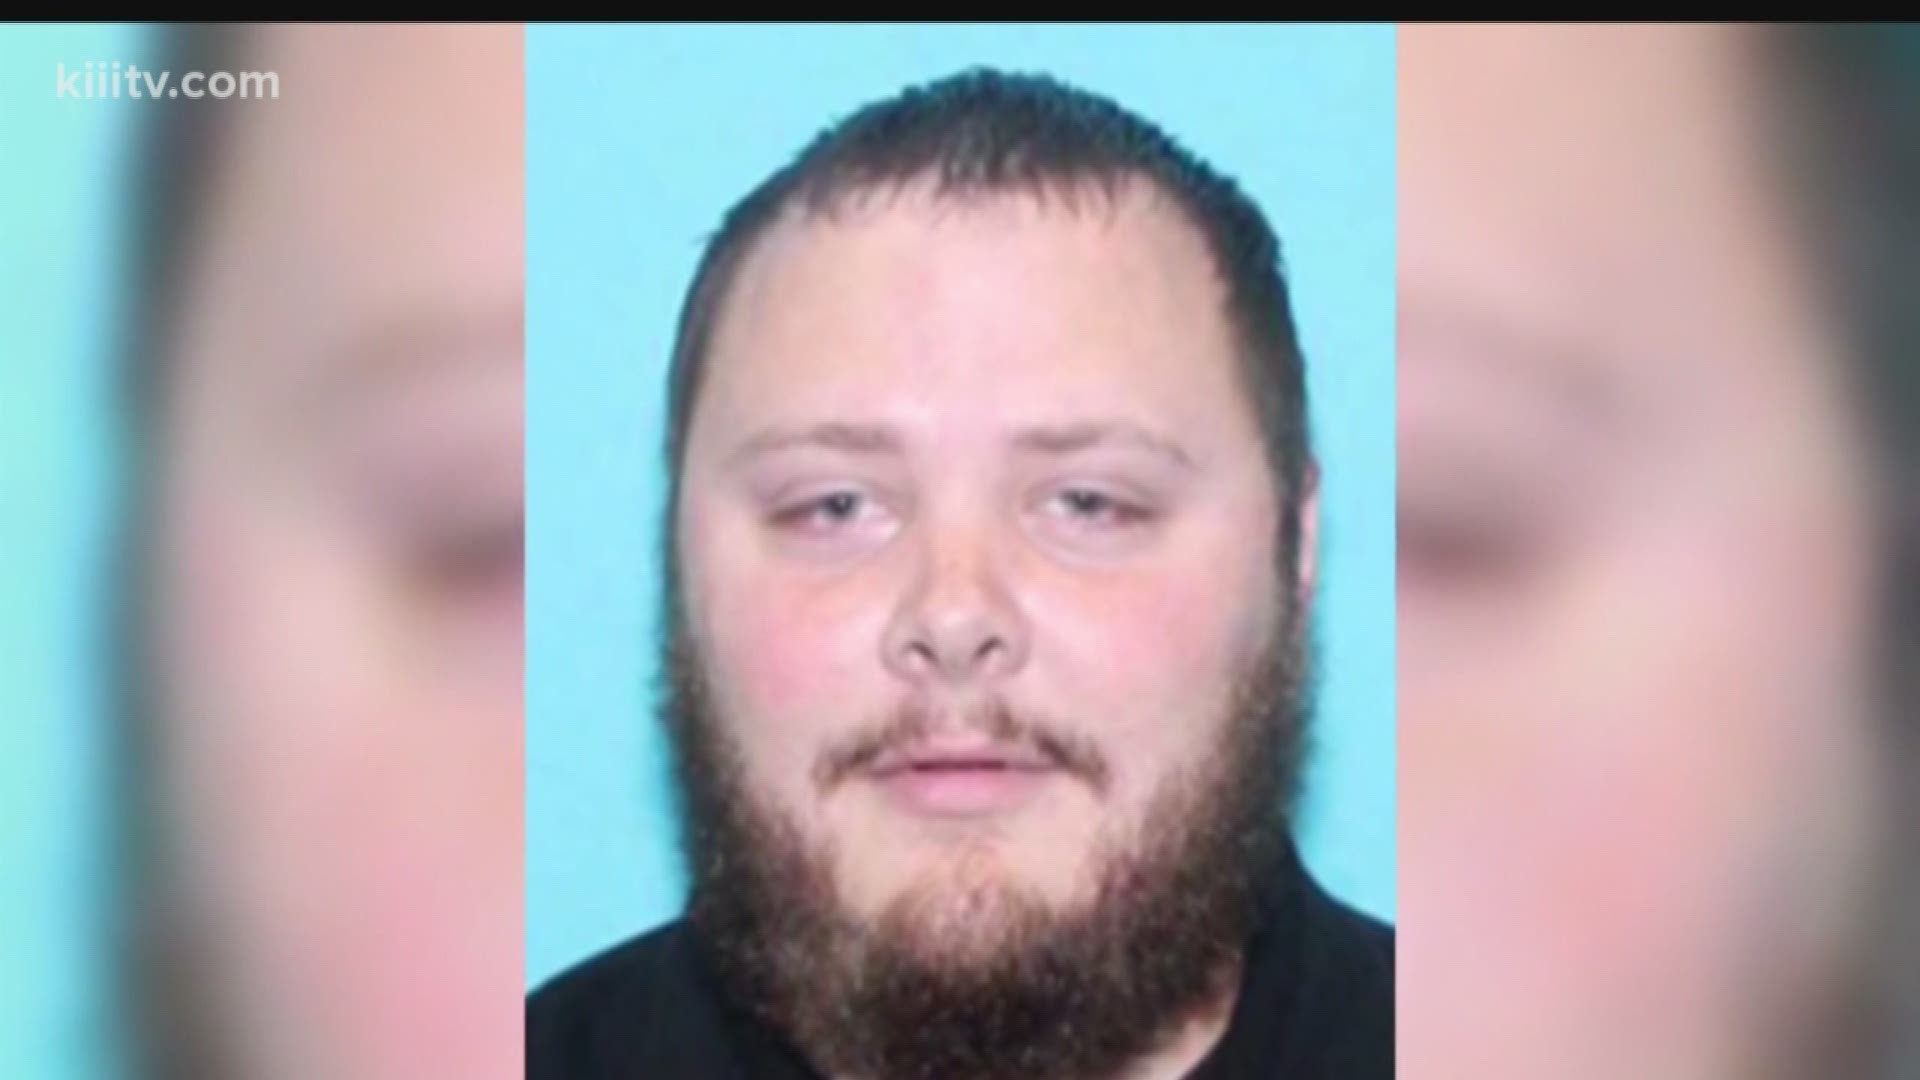 The First Baptist Church in Kingsville responded via Facebook late Sunday night to word of a connection between their church and the 26-year-old man who shot up a church in Sutherland Springs, Texas.